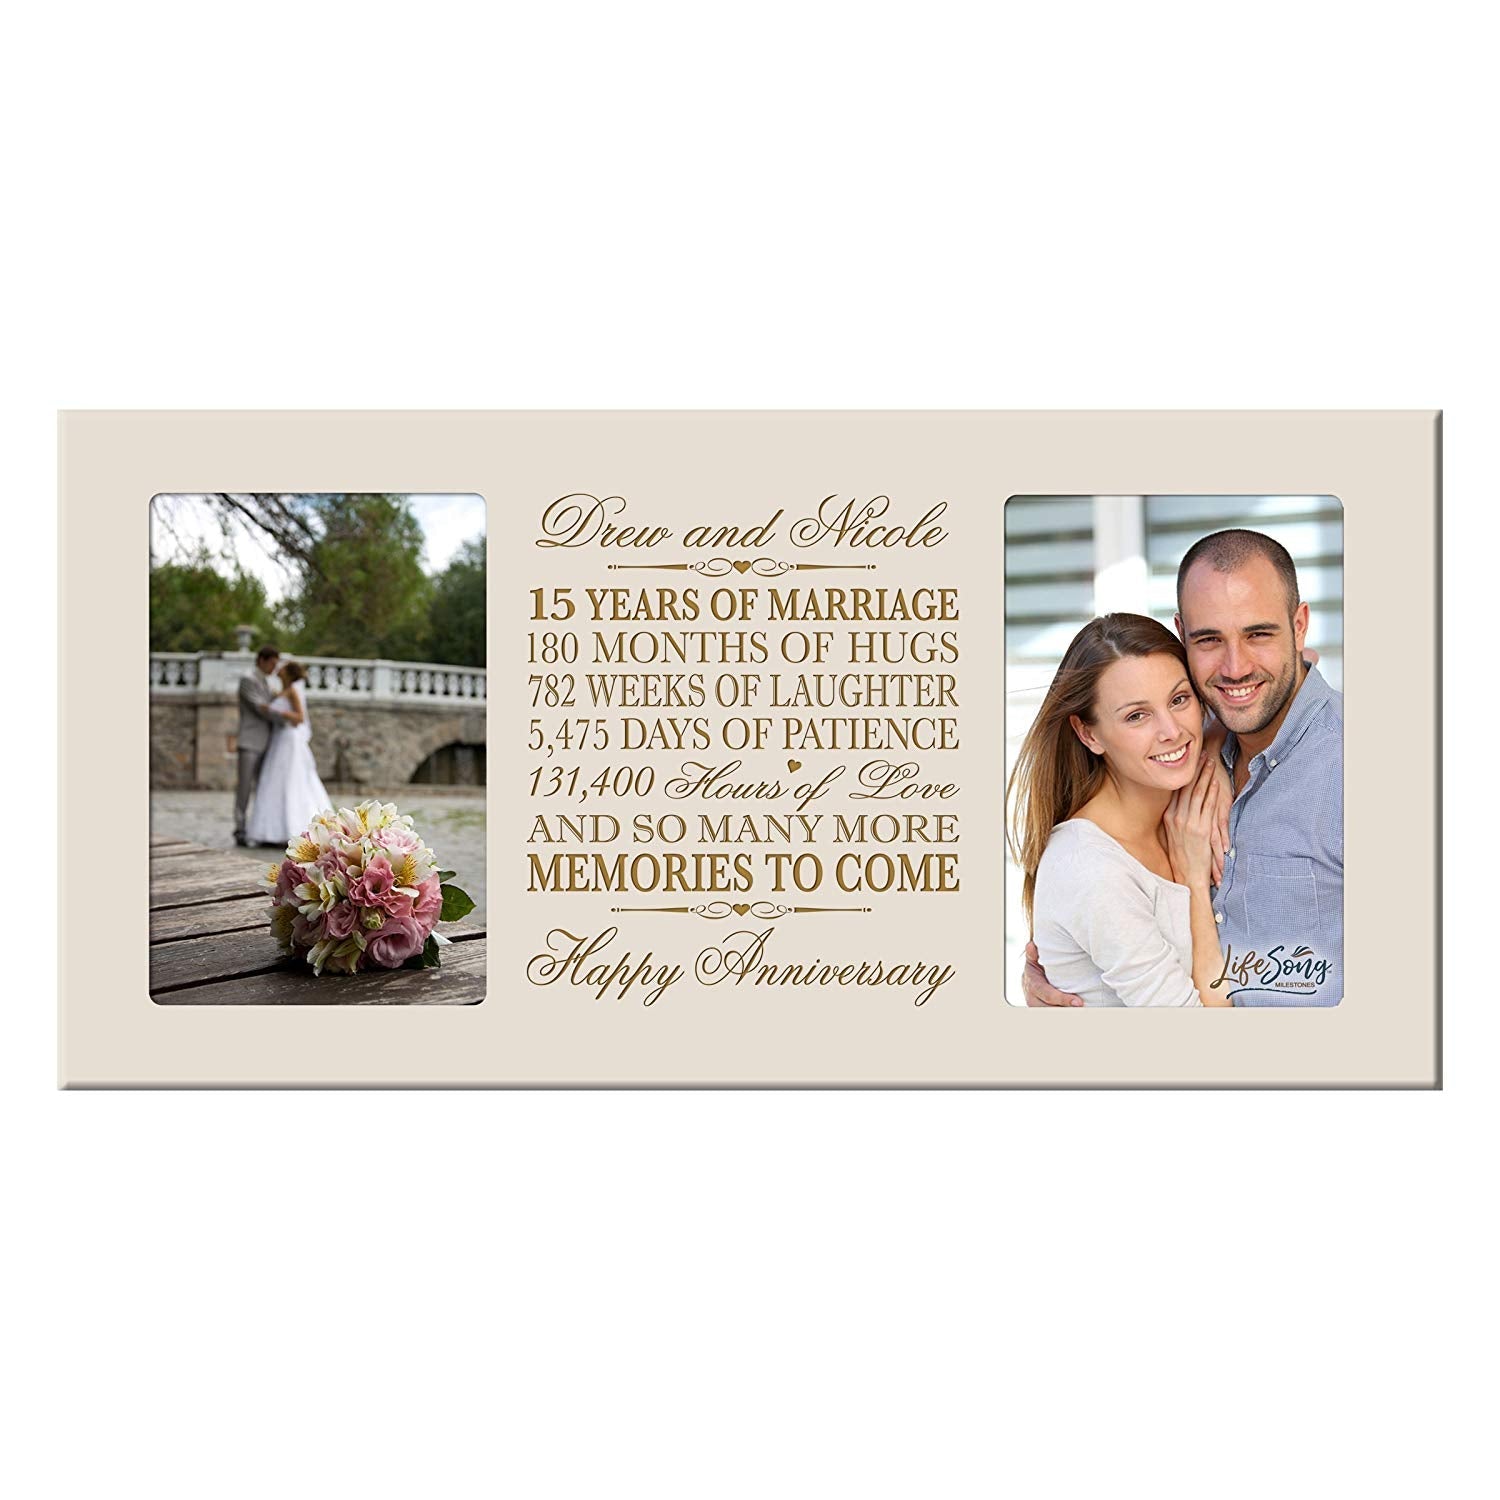 Custom Wooden Memorial Double Picture Frame holds 2-4x6 photo - In Lov -  LifeSong Milestones